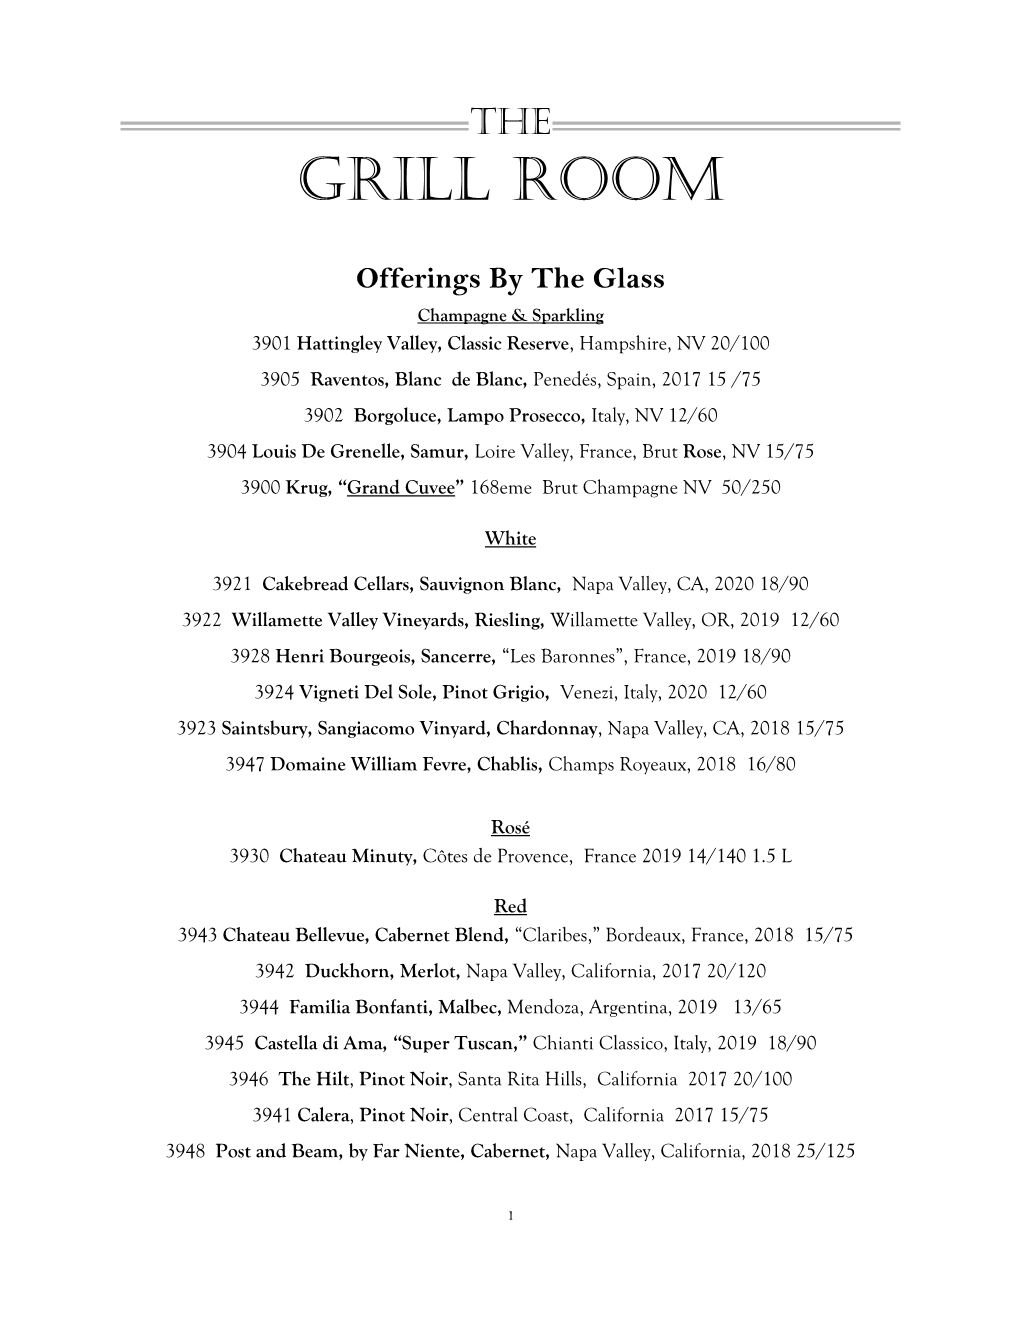 Grill Room Offerings by the Glass